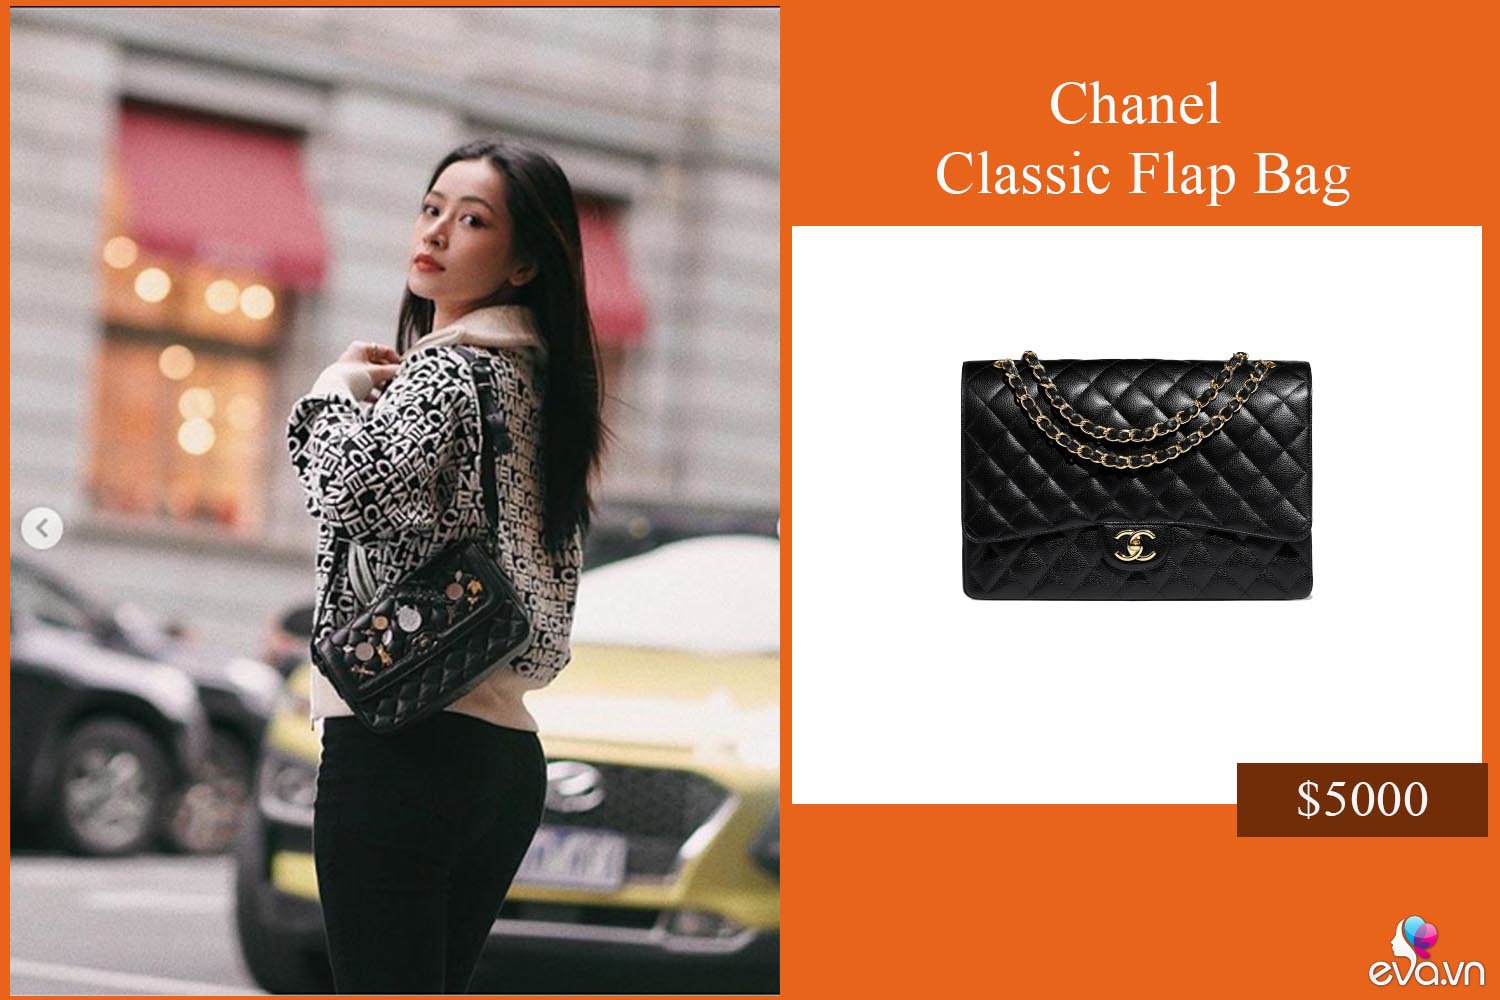 han quoc co jennie, viet nam co chi pu tham vong tro thanh “quy co chanel” - 7